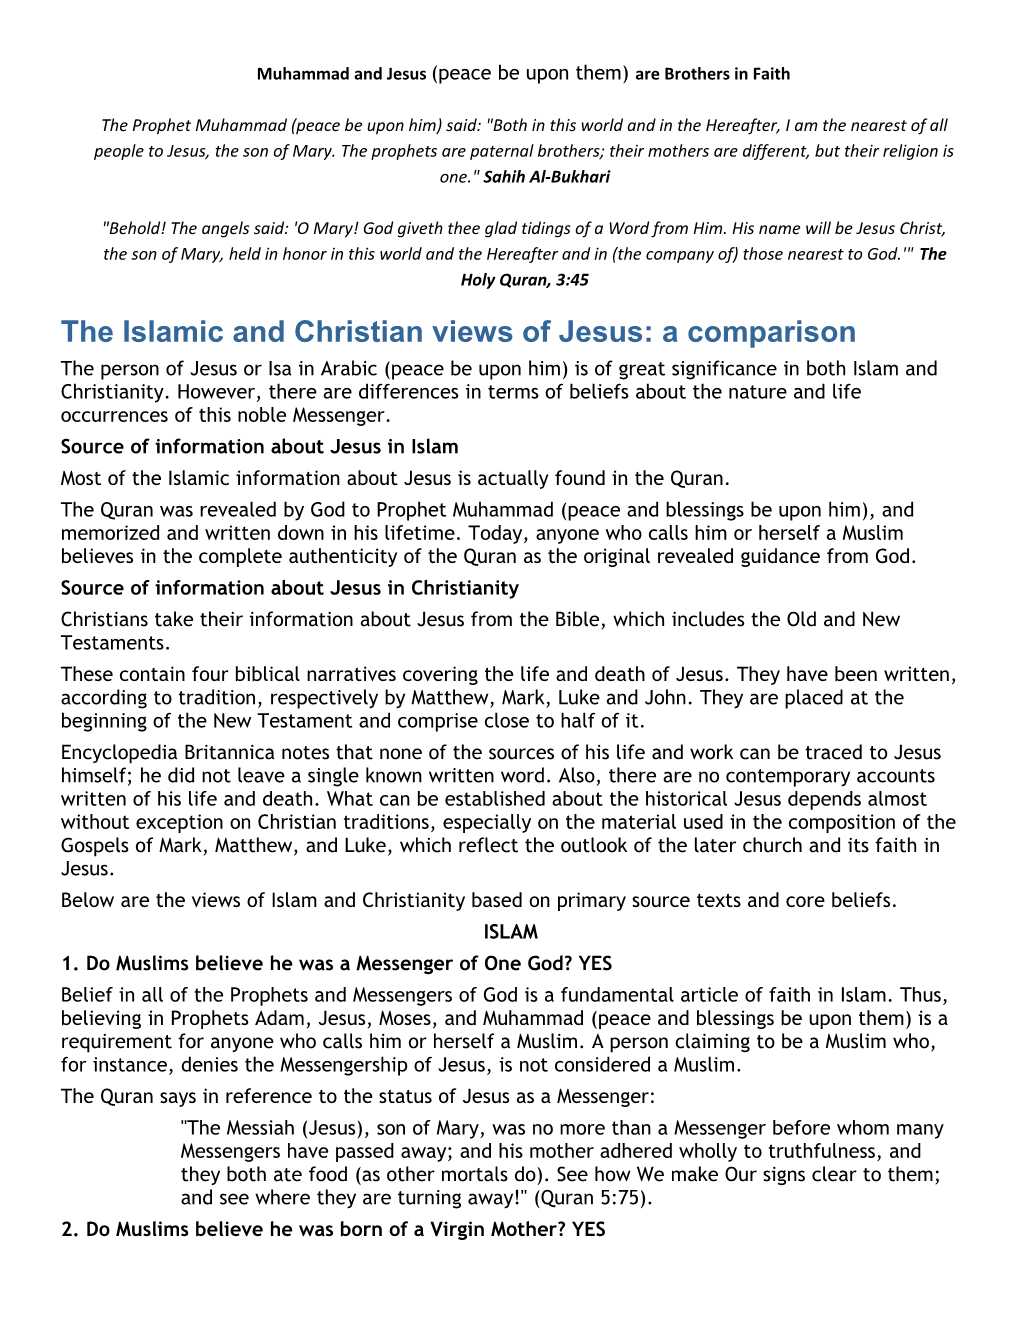 The Islamic and Christian Views of Jesus: a Comparison